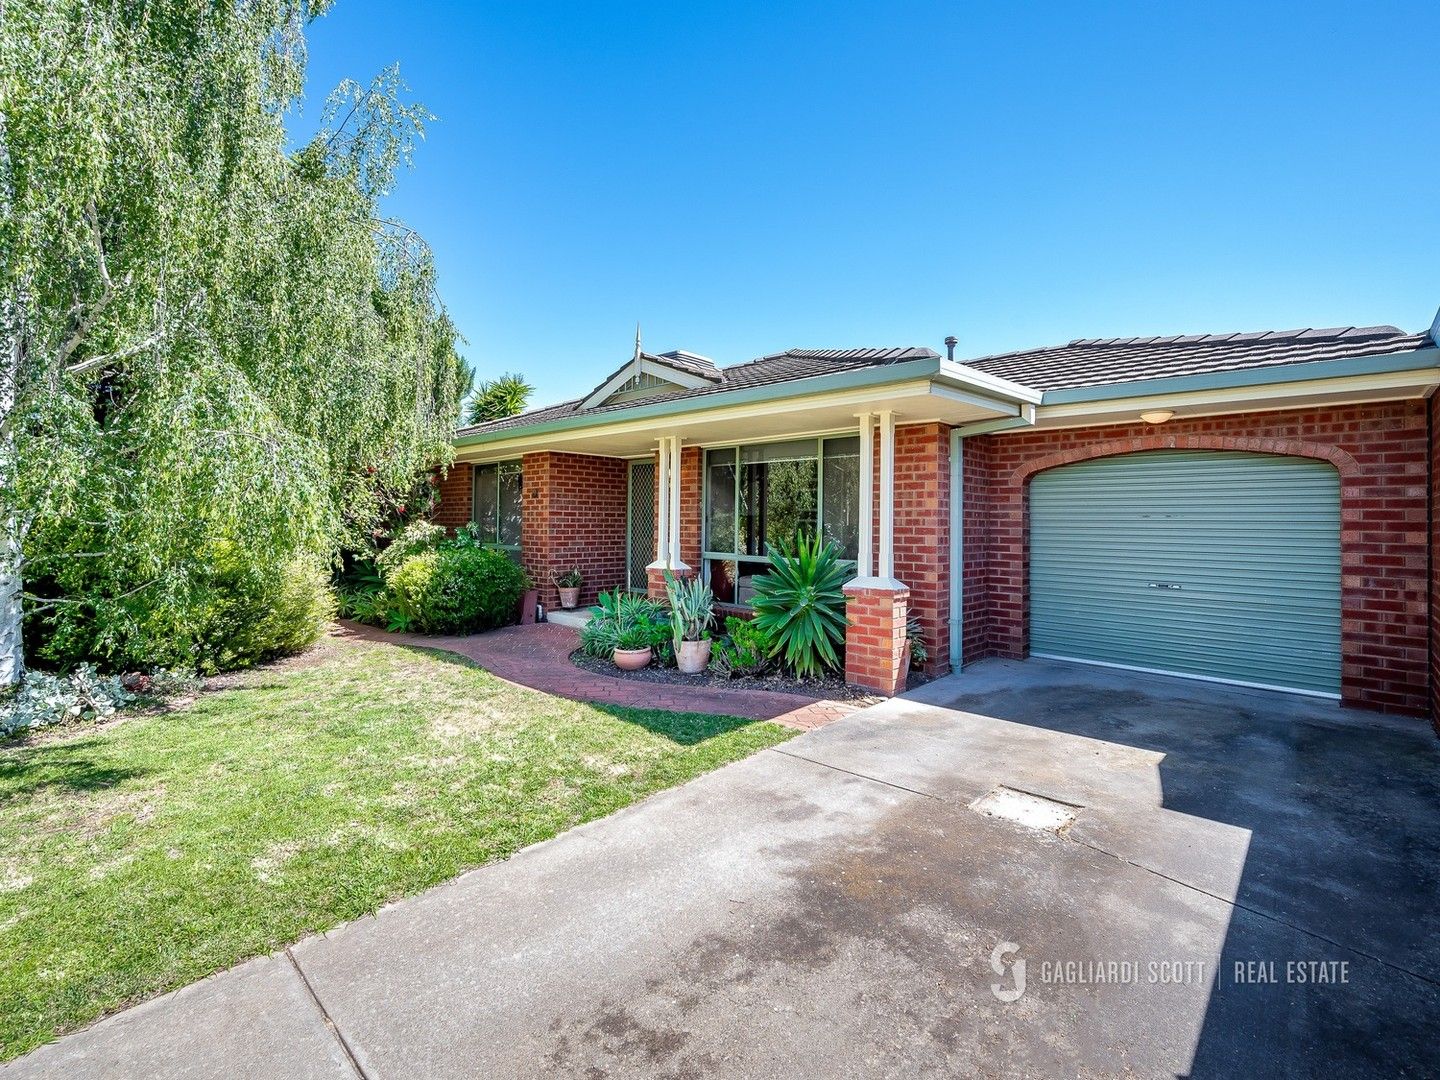 2 bedrooms Townhouse in 9 Nightingale Way SHEPPARTON VIC, 3630